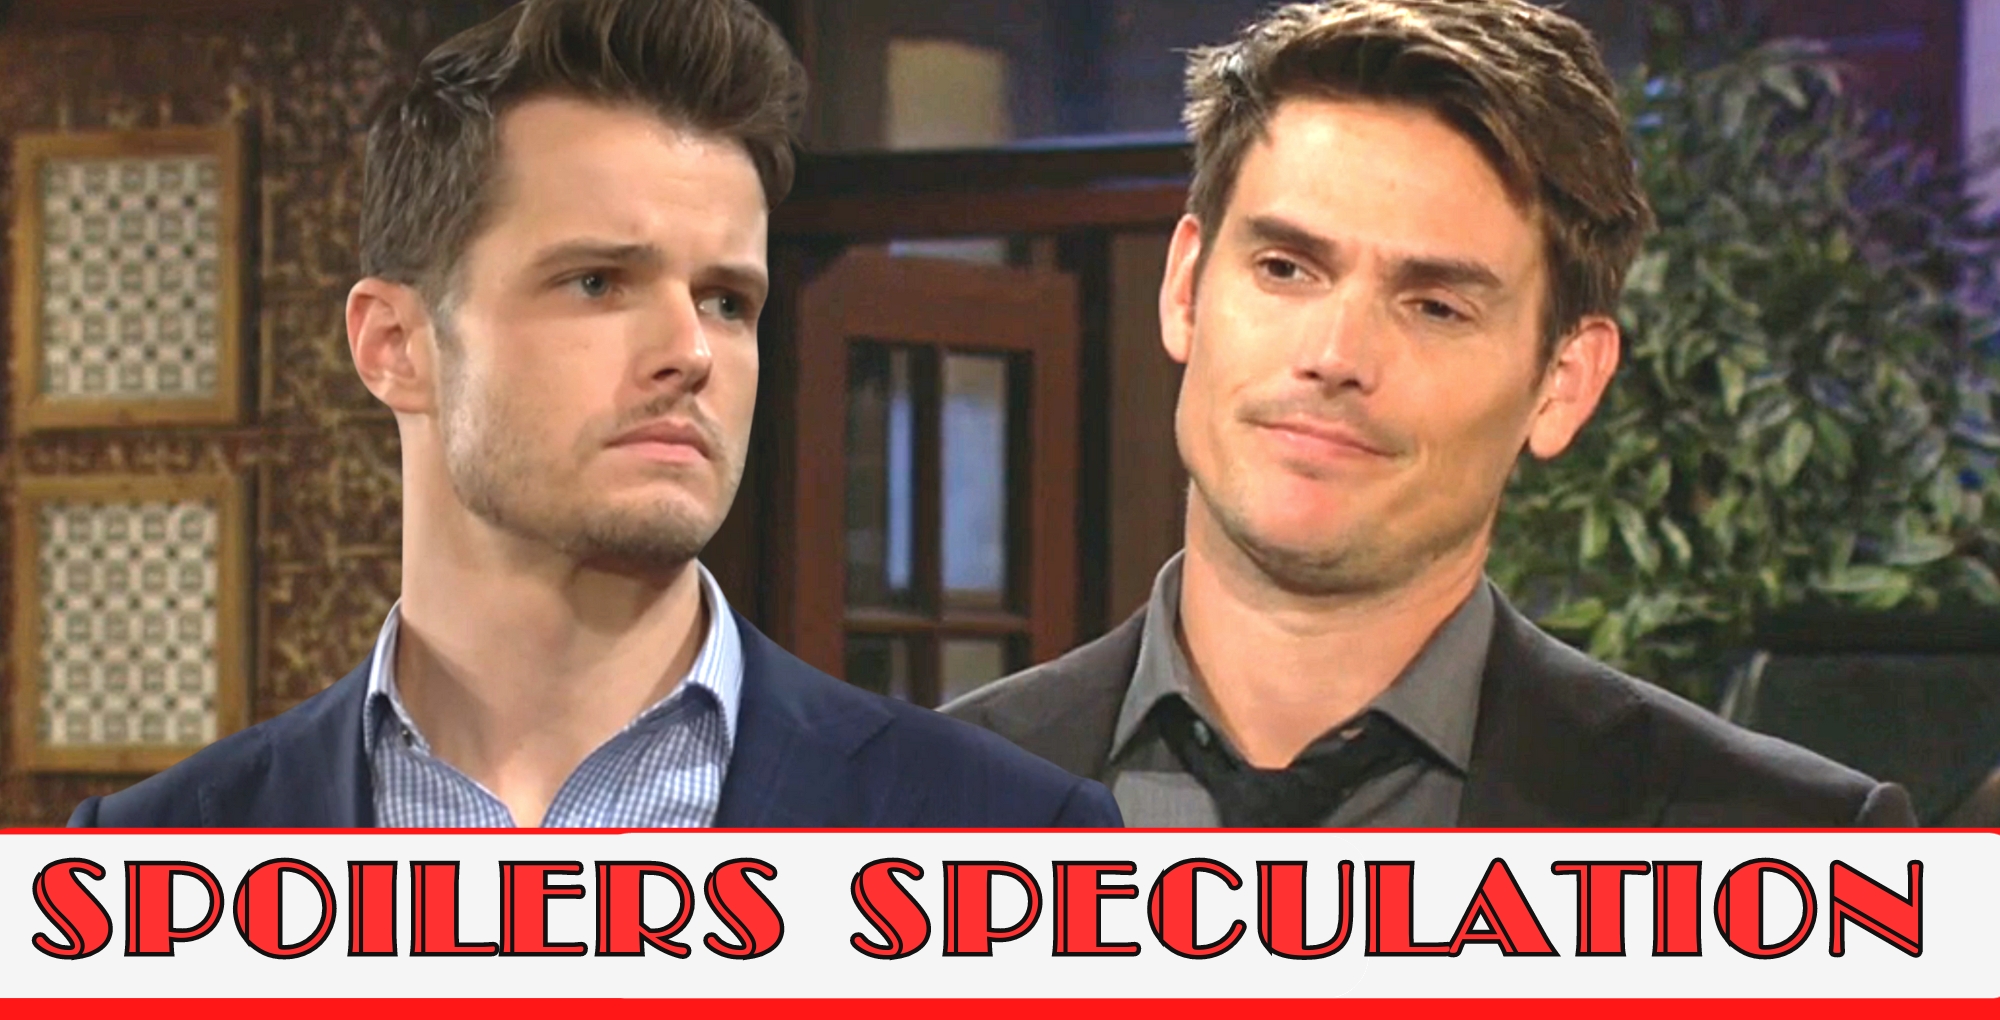 y&r spoilers speculation banner over kyle and adam.